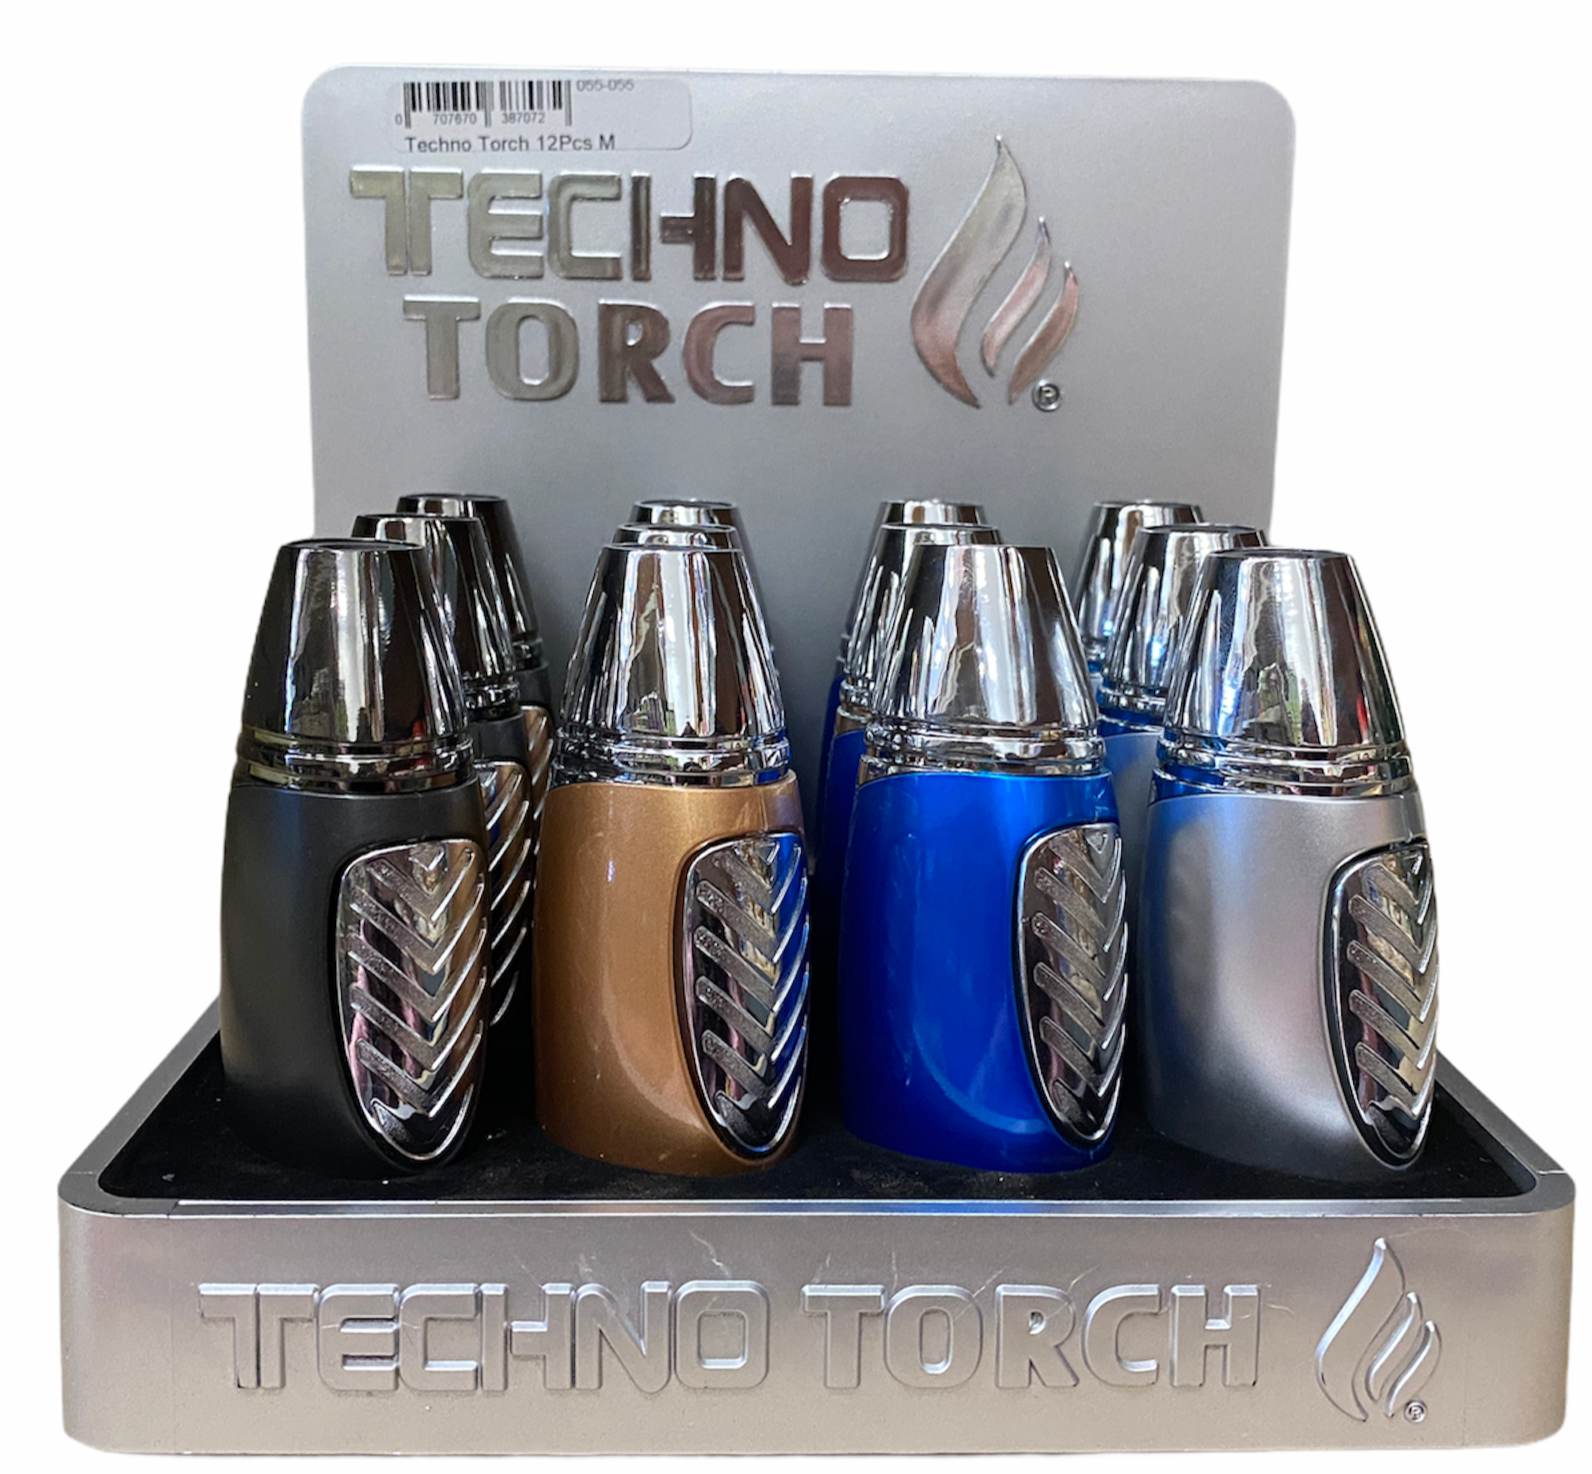 TECHNO TORCH LIGHTER SOLID METALIC DESIGN | PACK OF 12